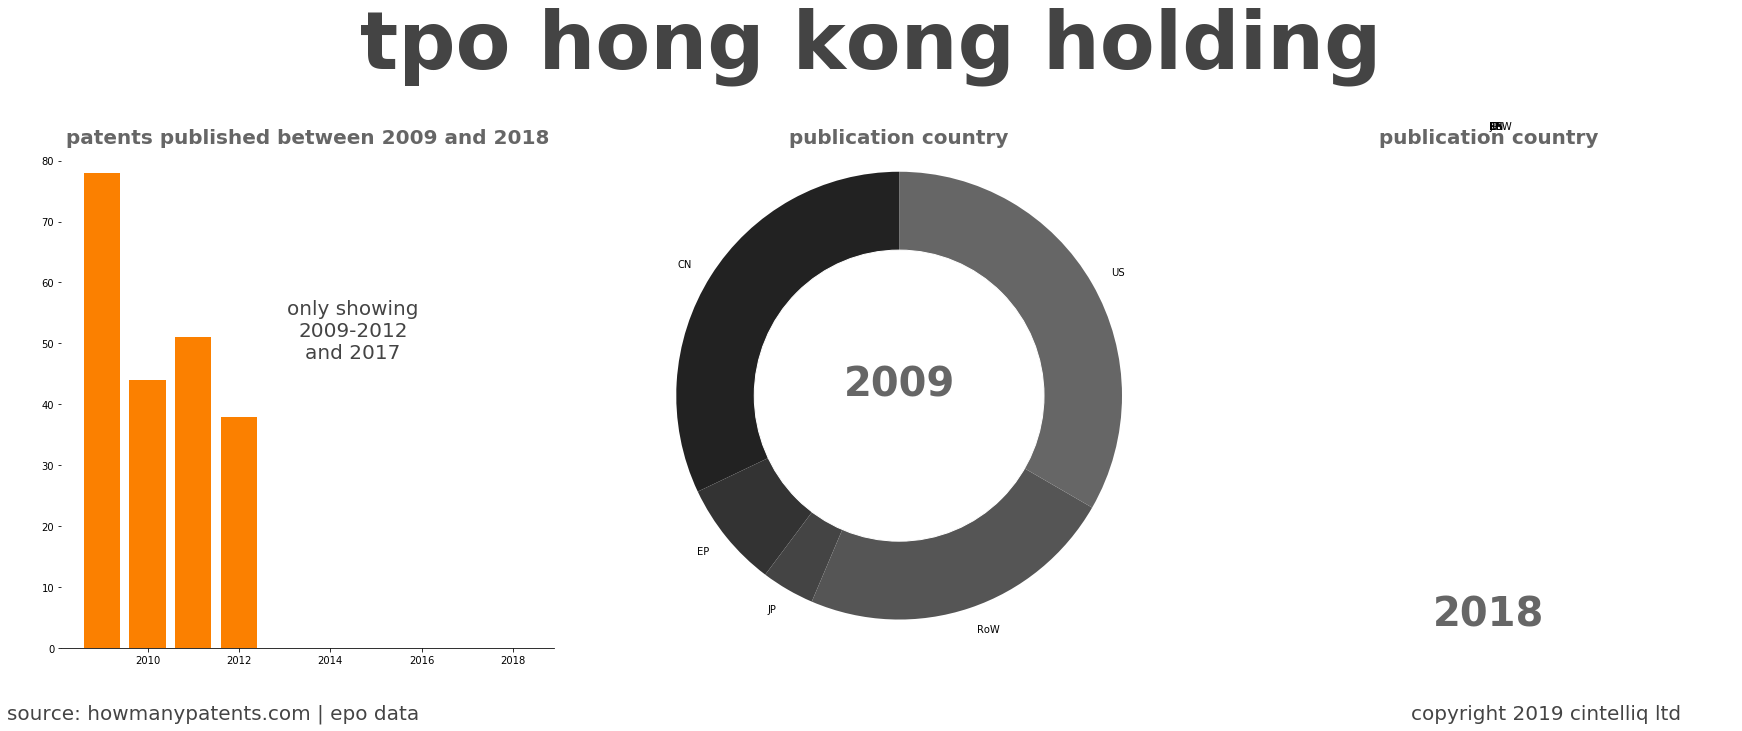 summary of patents for Tpo Hong Kong Holding